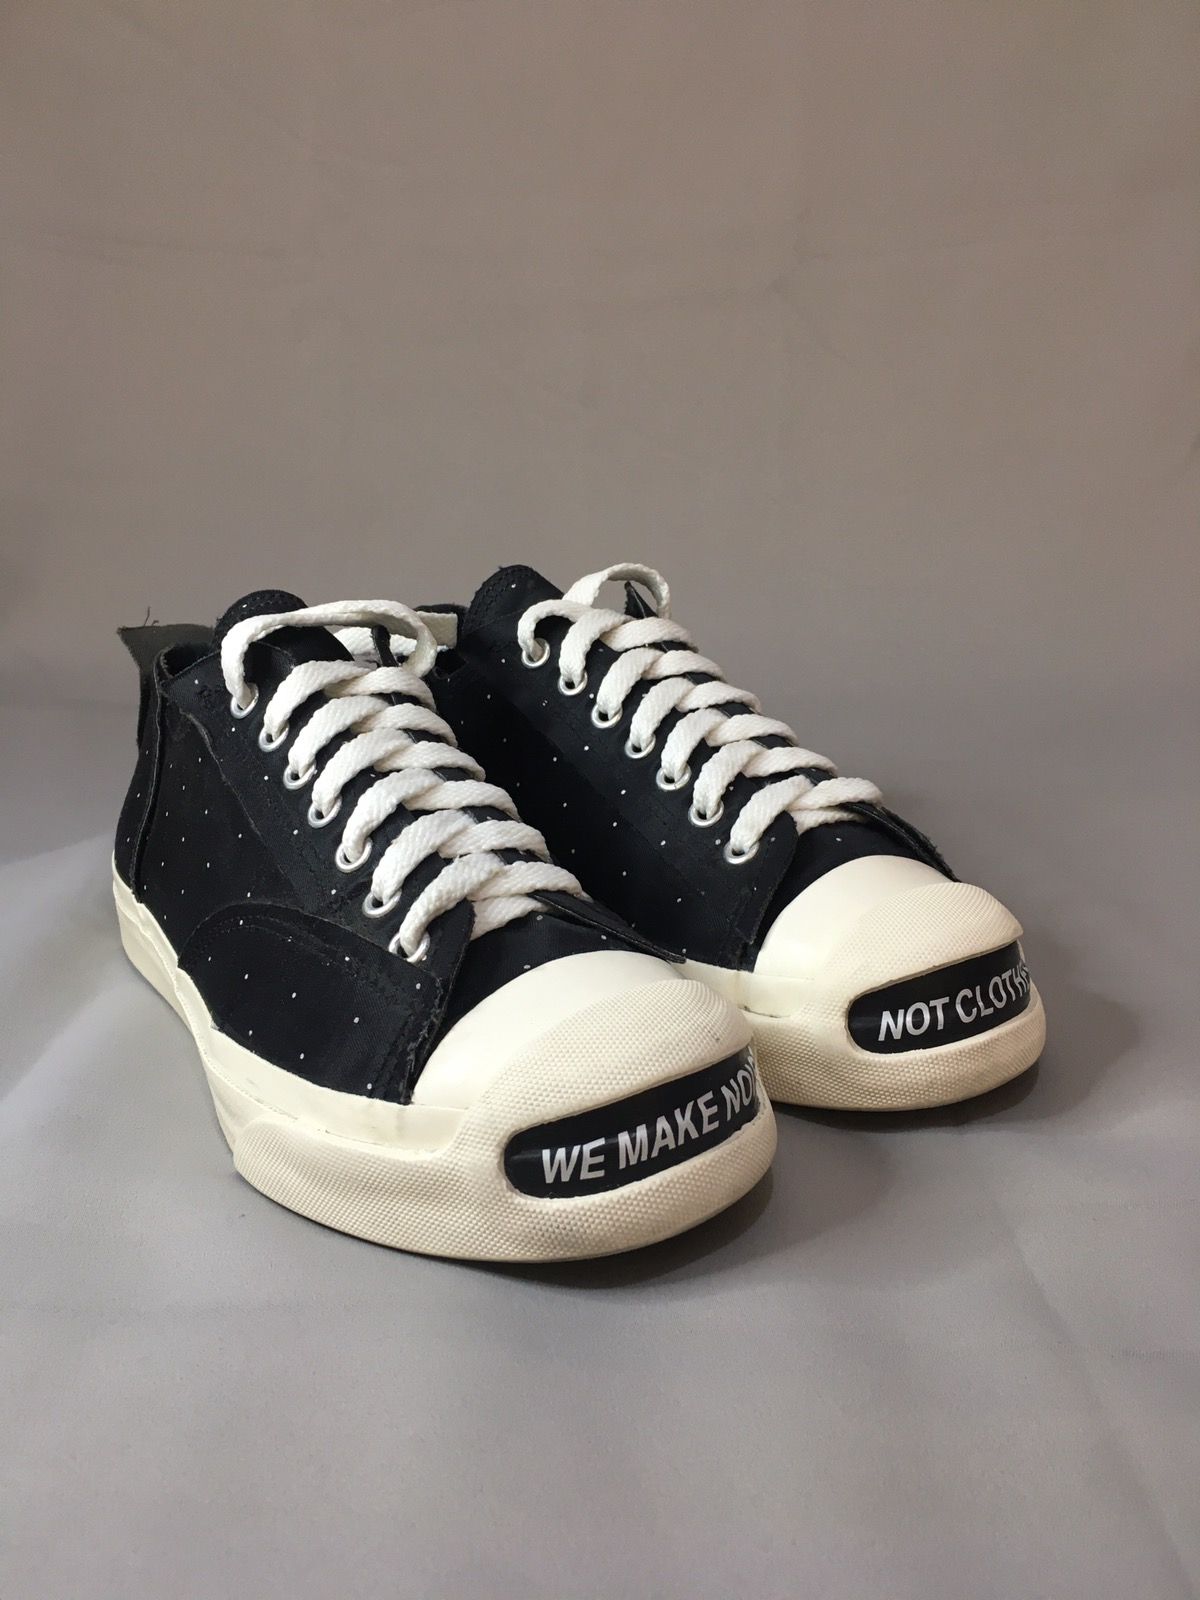 Undercover Undercover X Jack Purcell Polkadots | Grailed